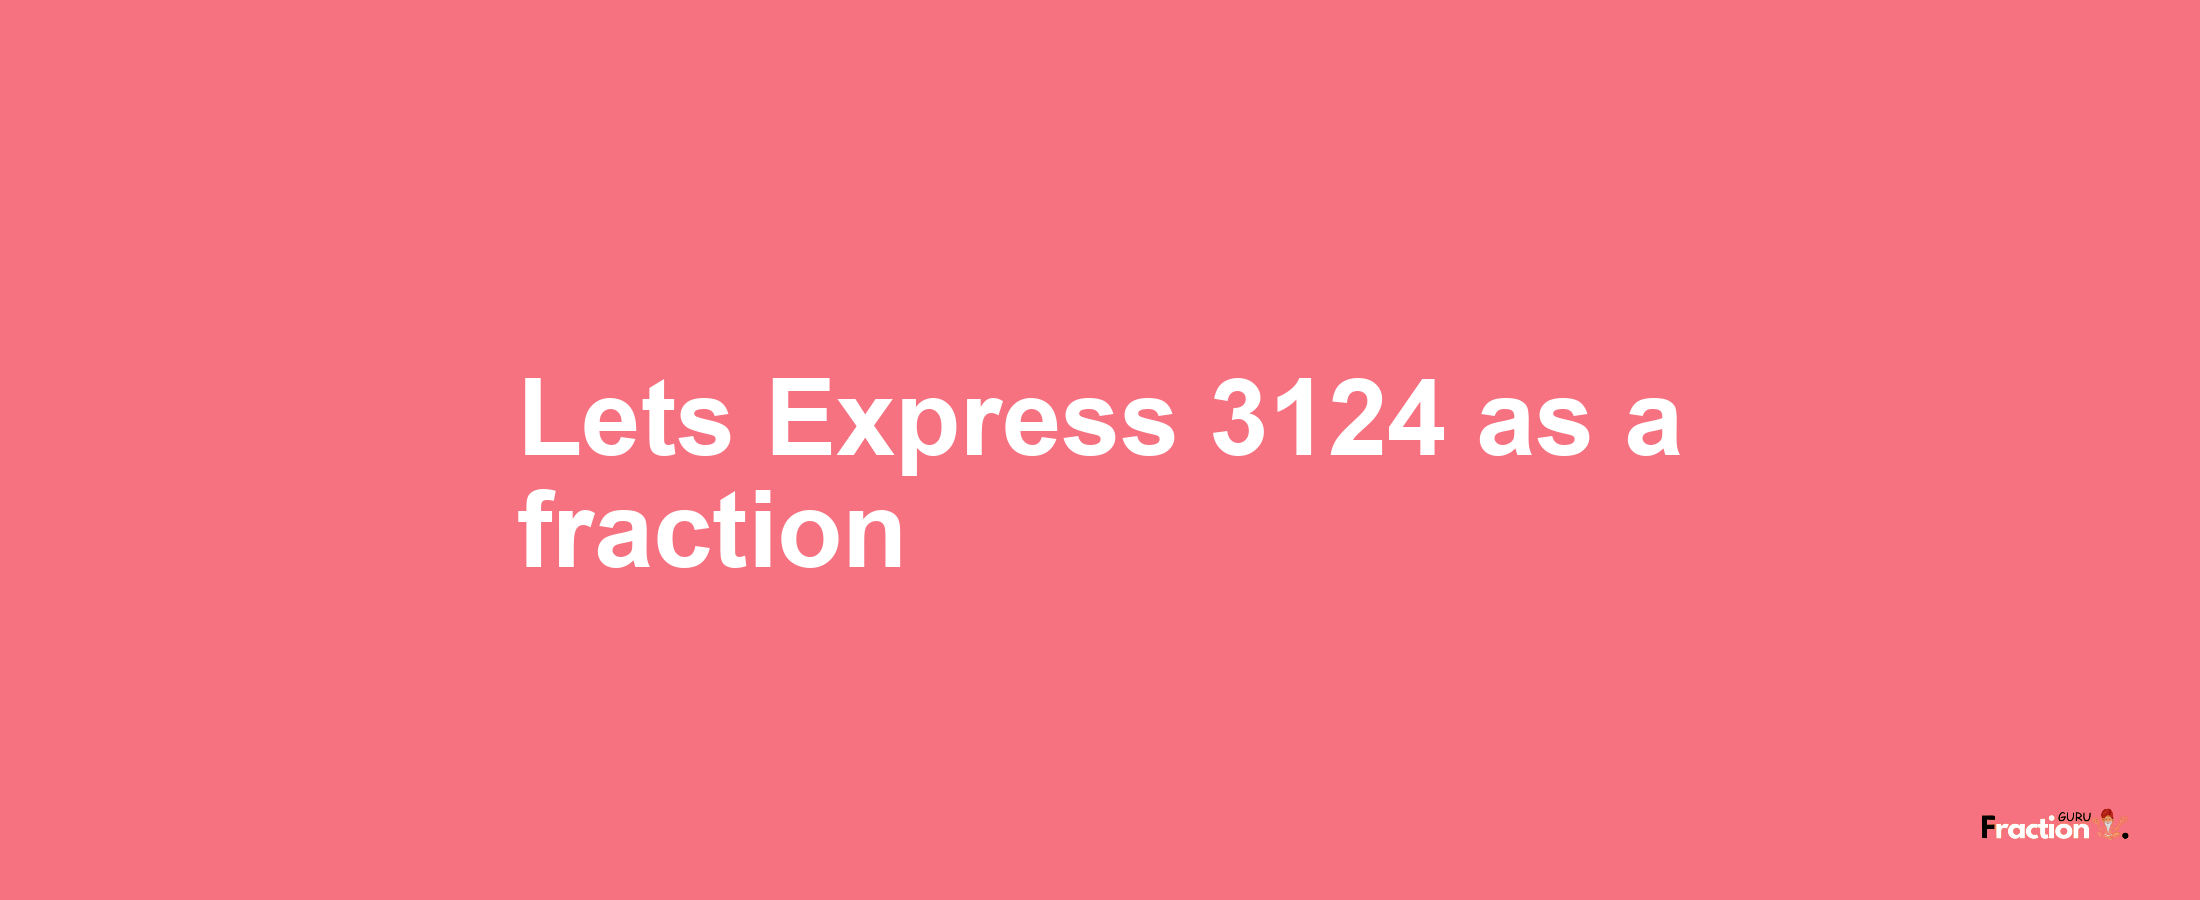 Lets Express 3124 as afraction